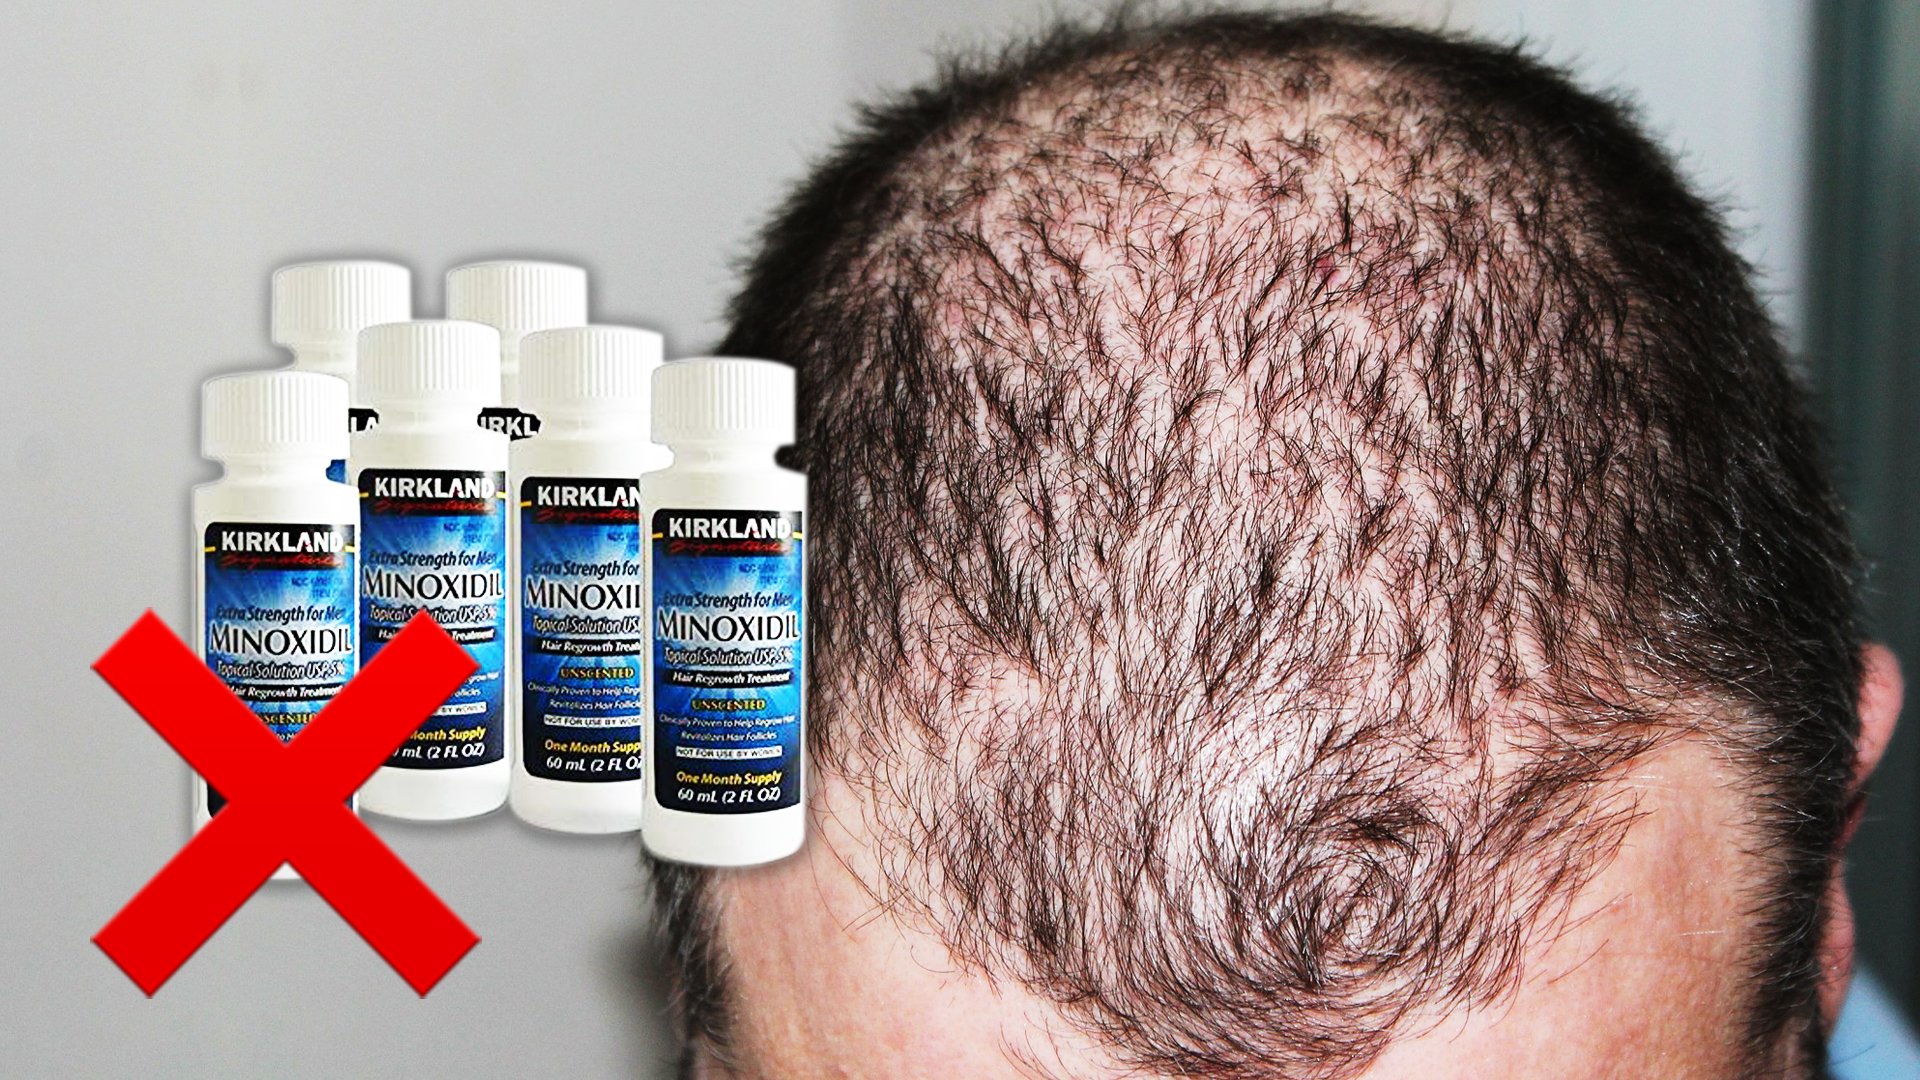 Minoxidil DOES NOT Prevent Hair Loss